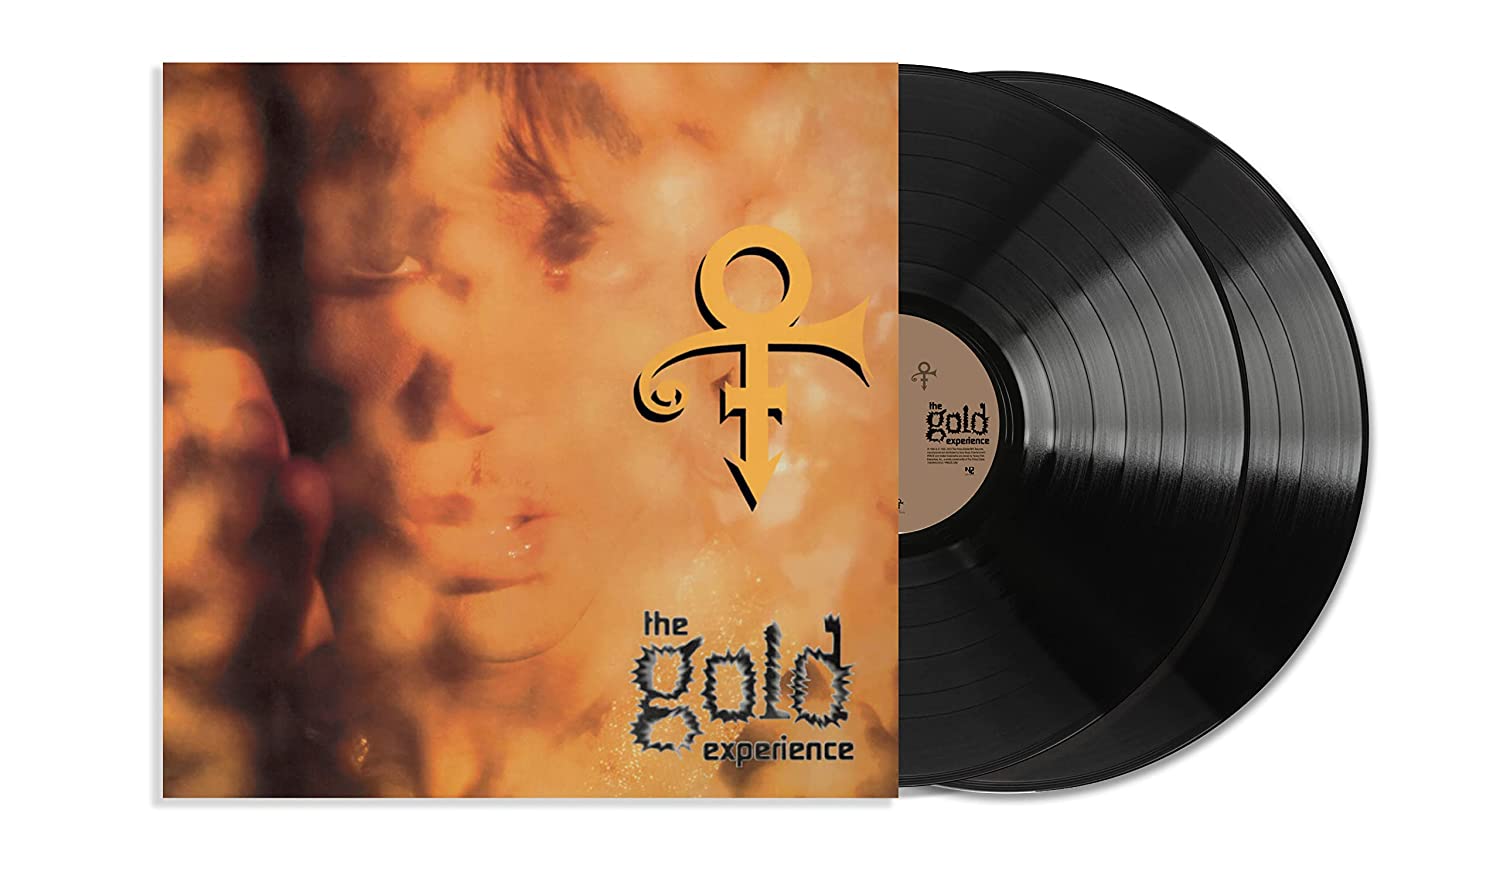 The Artist (Formerly Known As Prince) – The Gold Experience 2LP